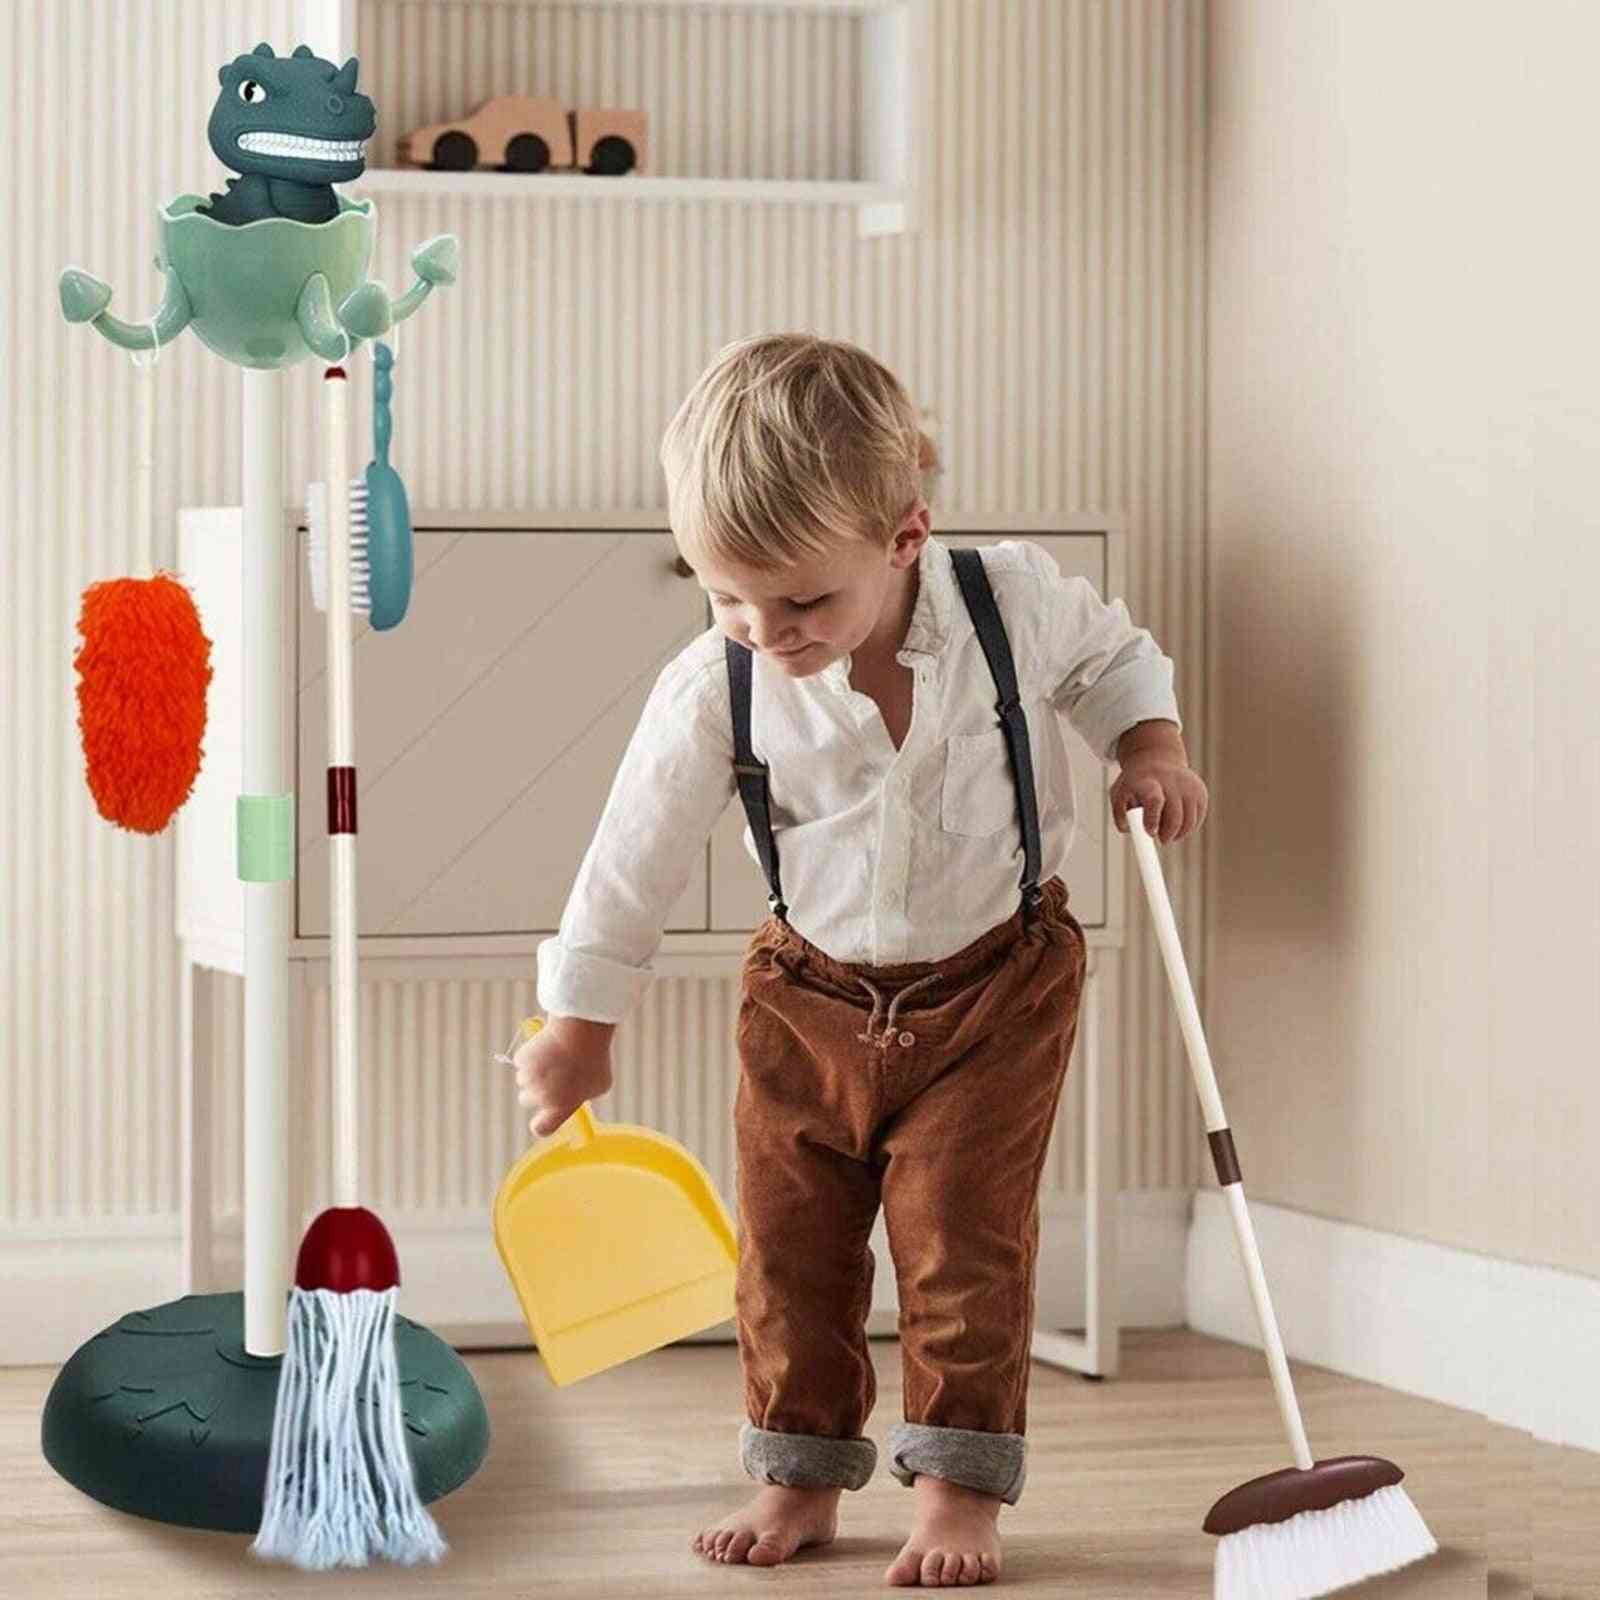 Small Broom, Dustpan Cleaning, Pretend Play Activities